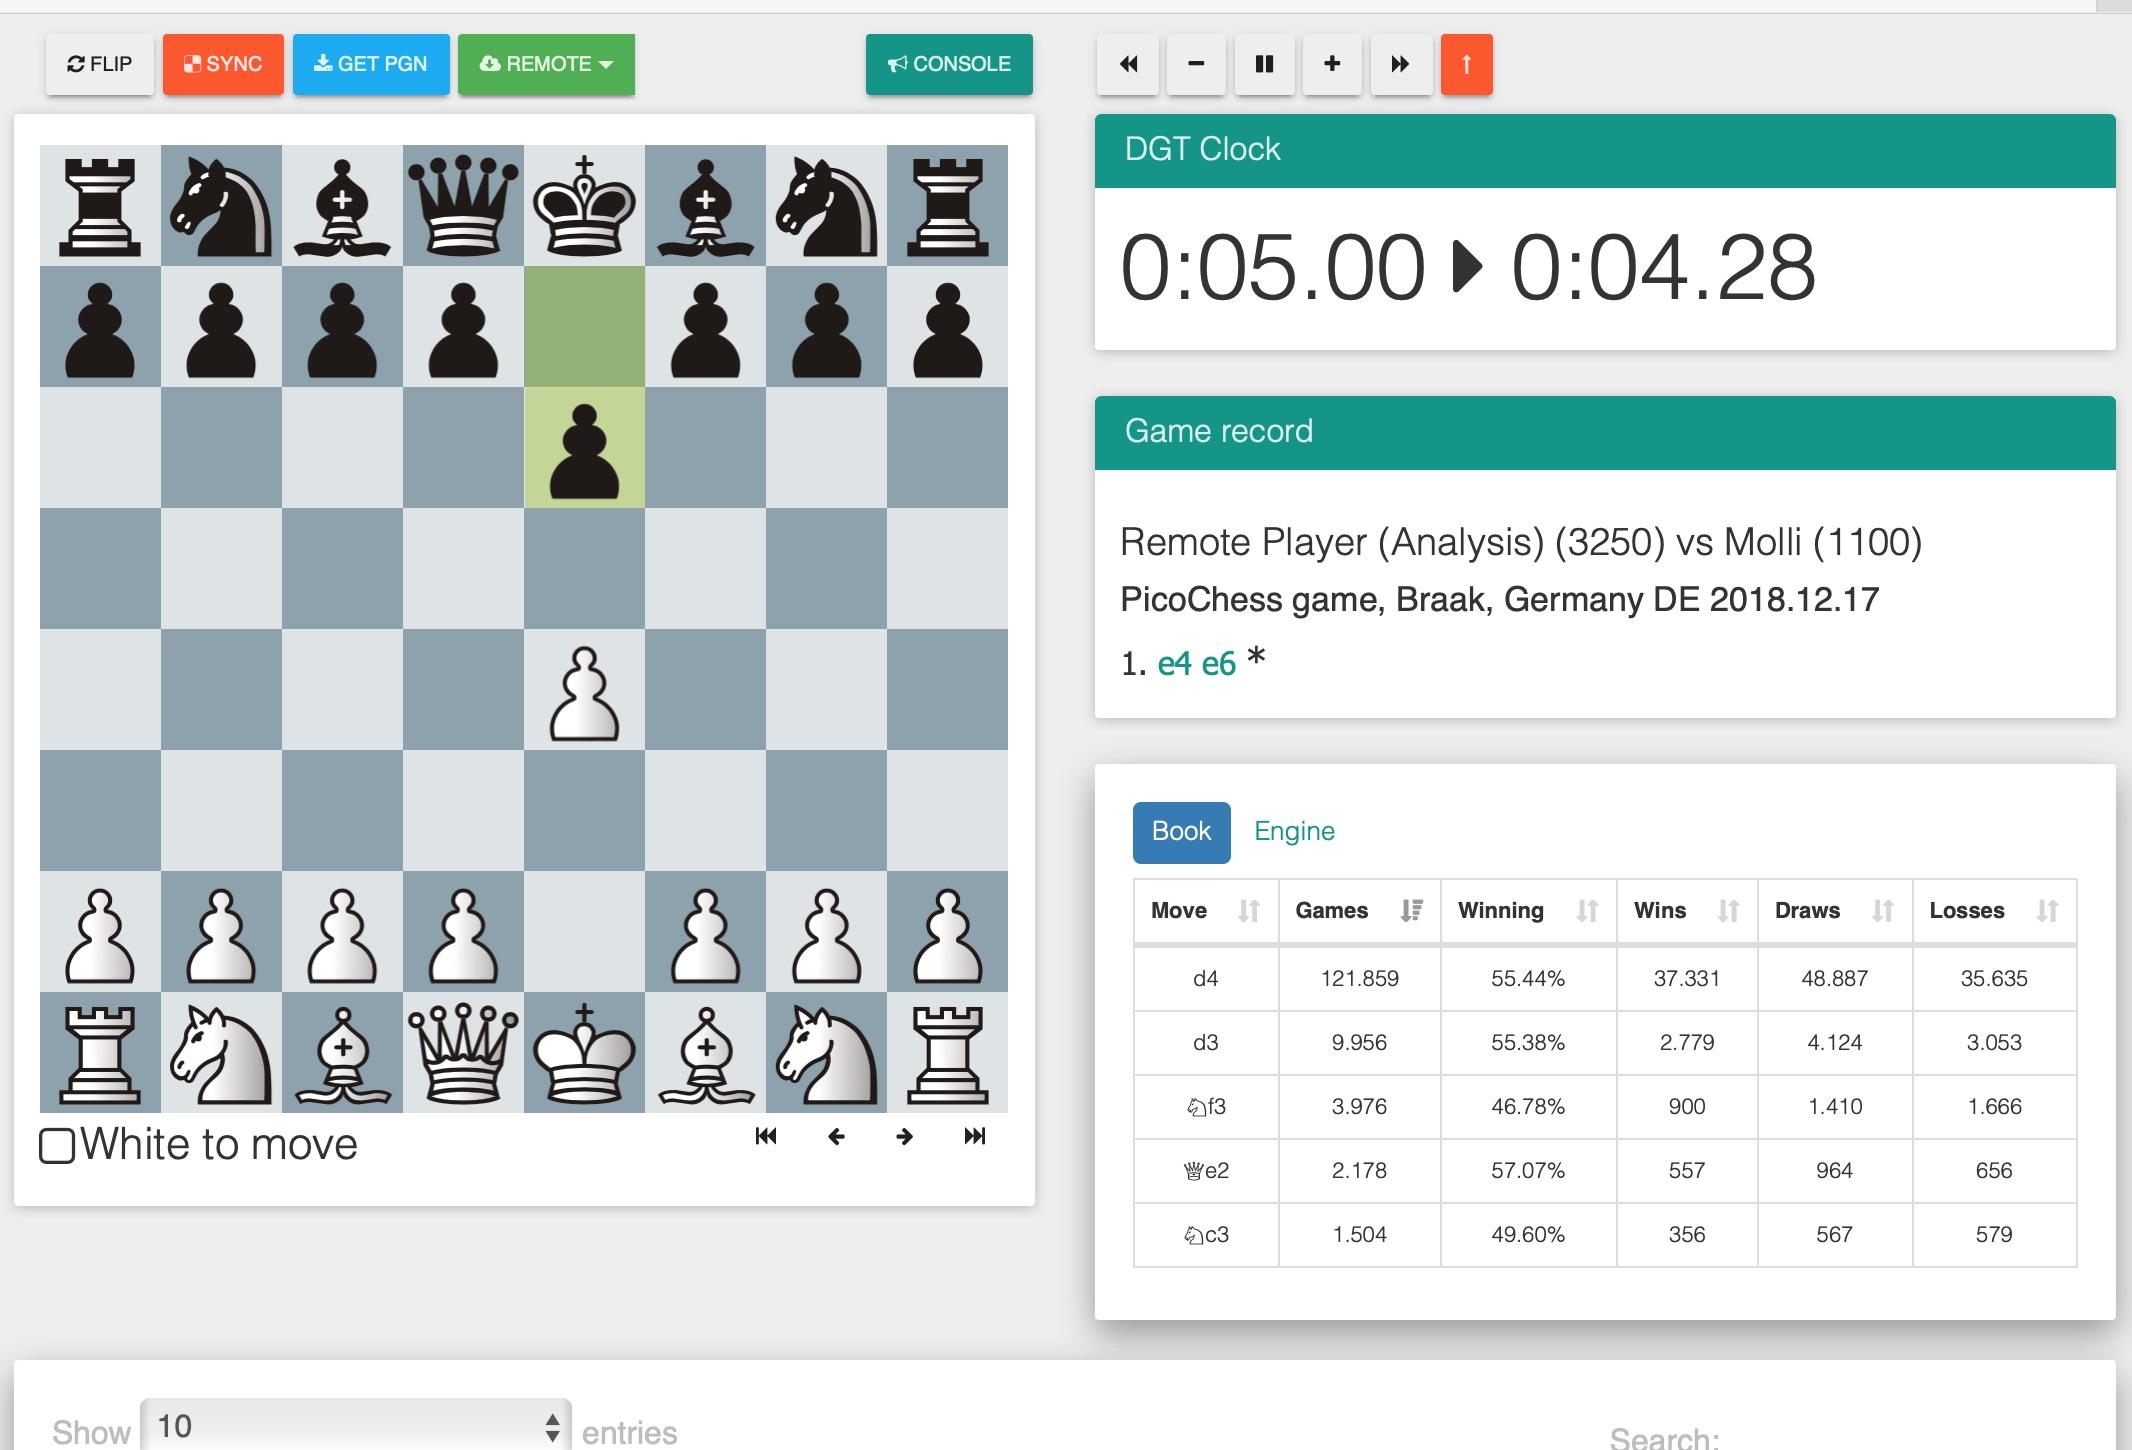 GitHub - themennice/bethtchess: Get the next best chess move in